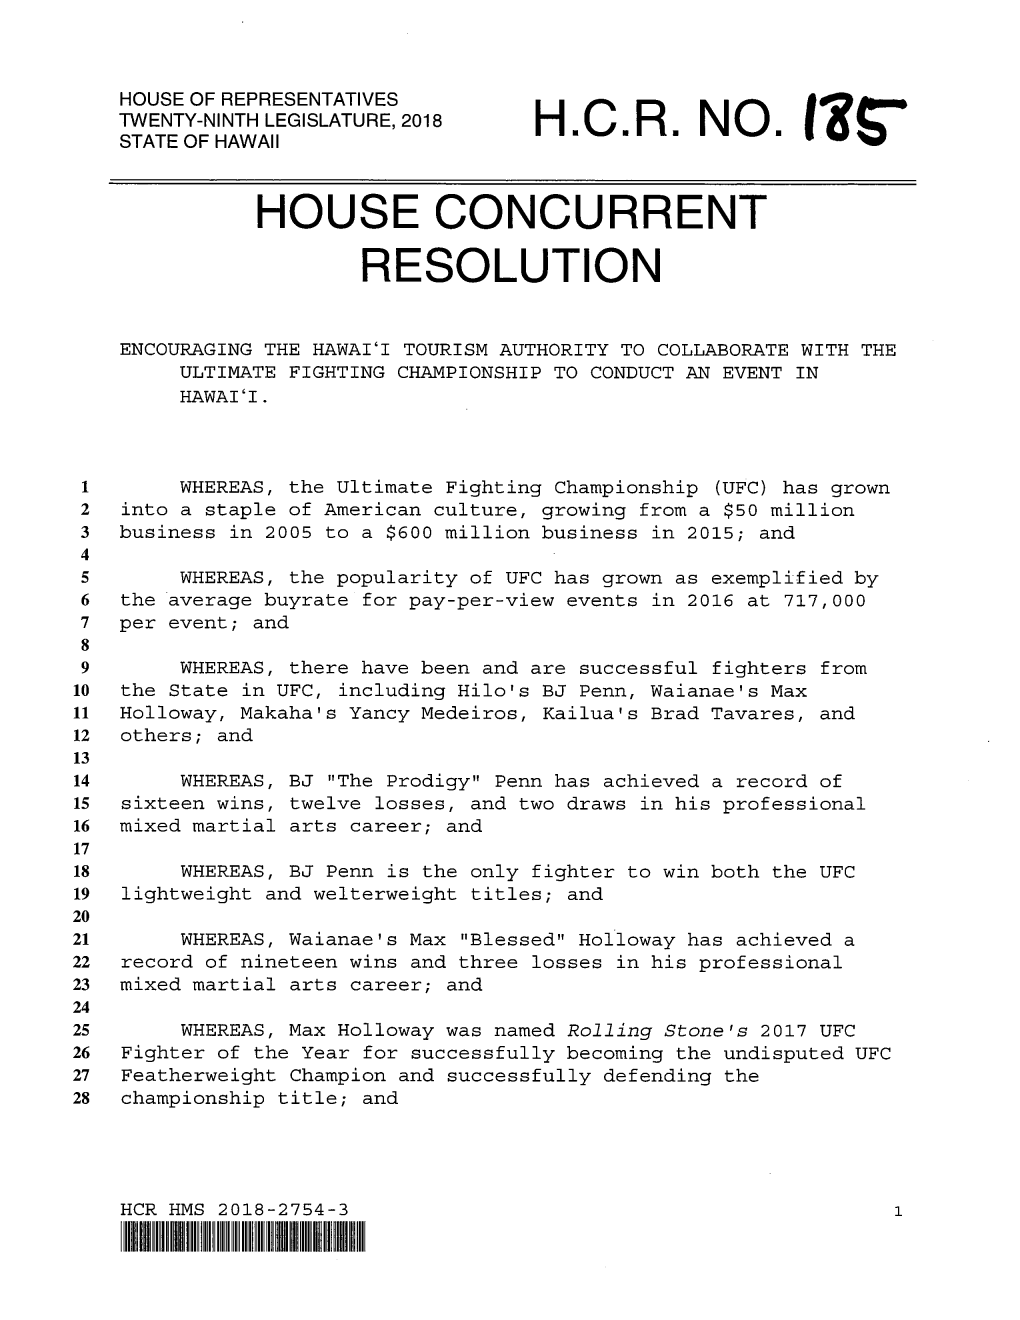 House Concurrent Resolution